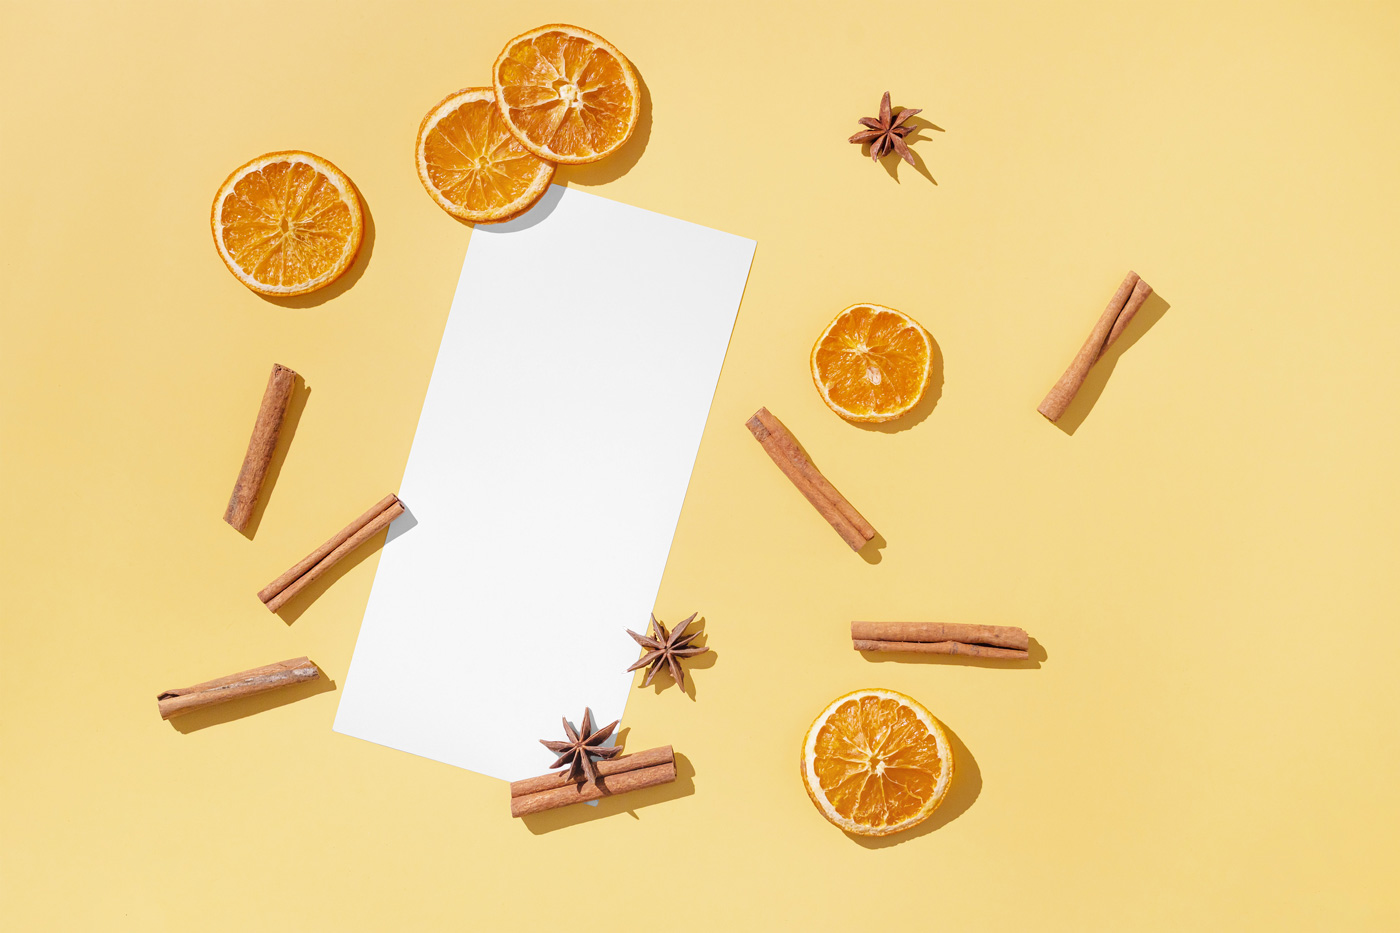 Oblong Card Mockup Featuring Dried Fruit and Cinnamon FREE PSD